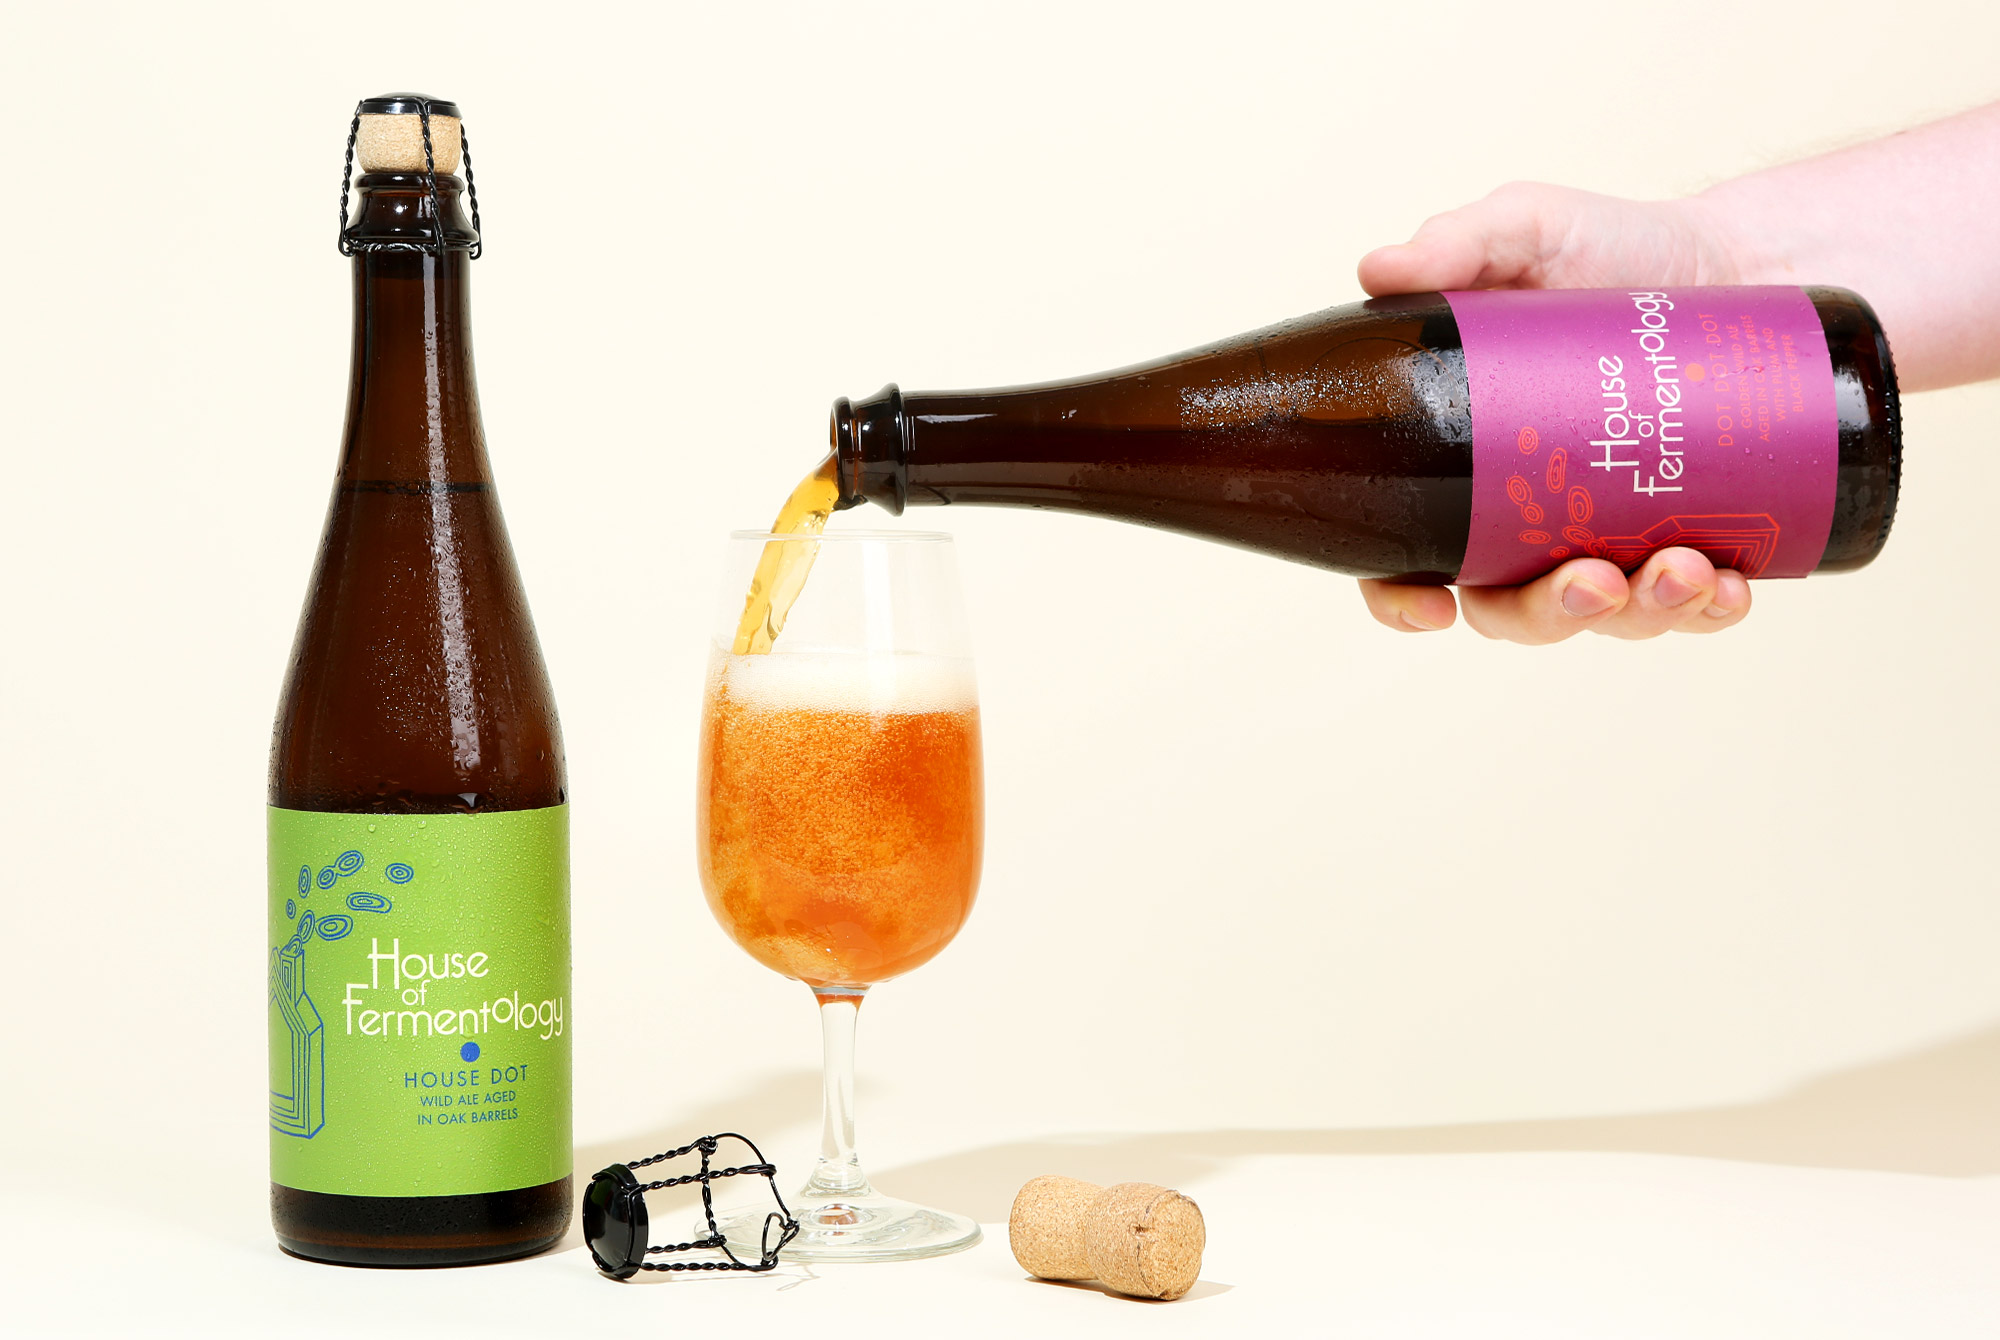 You Should Be Drinking House of Fermentology this Summer